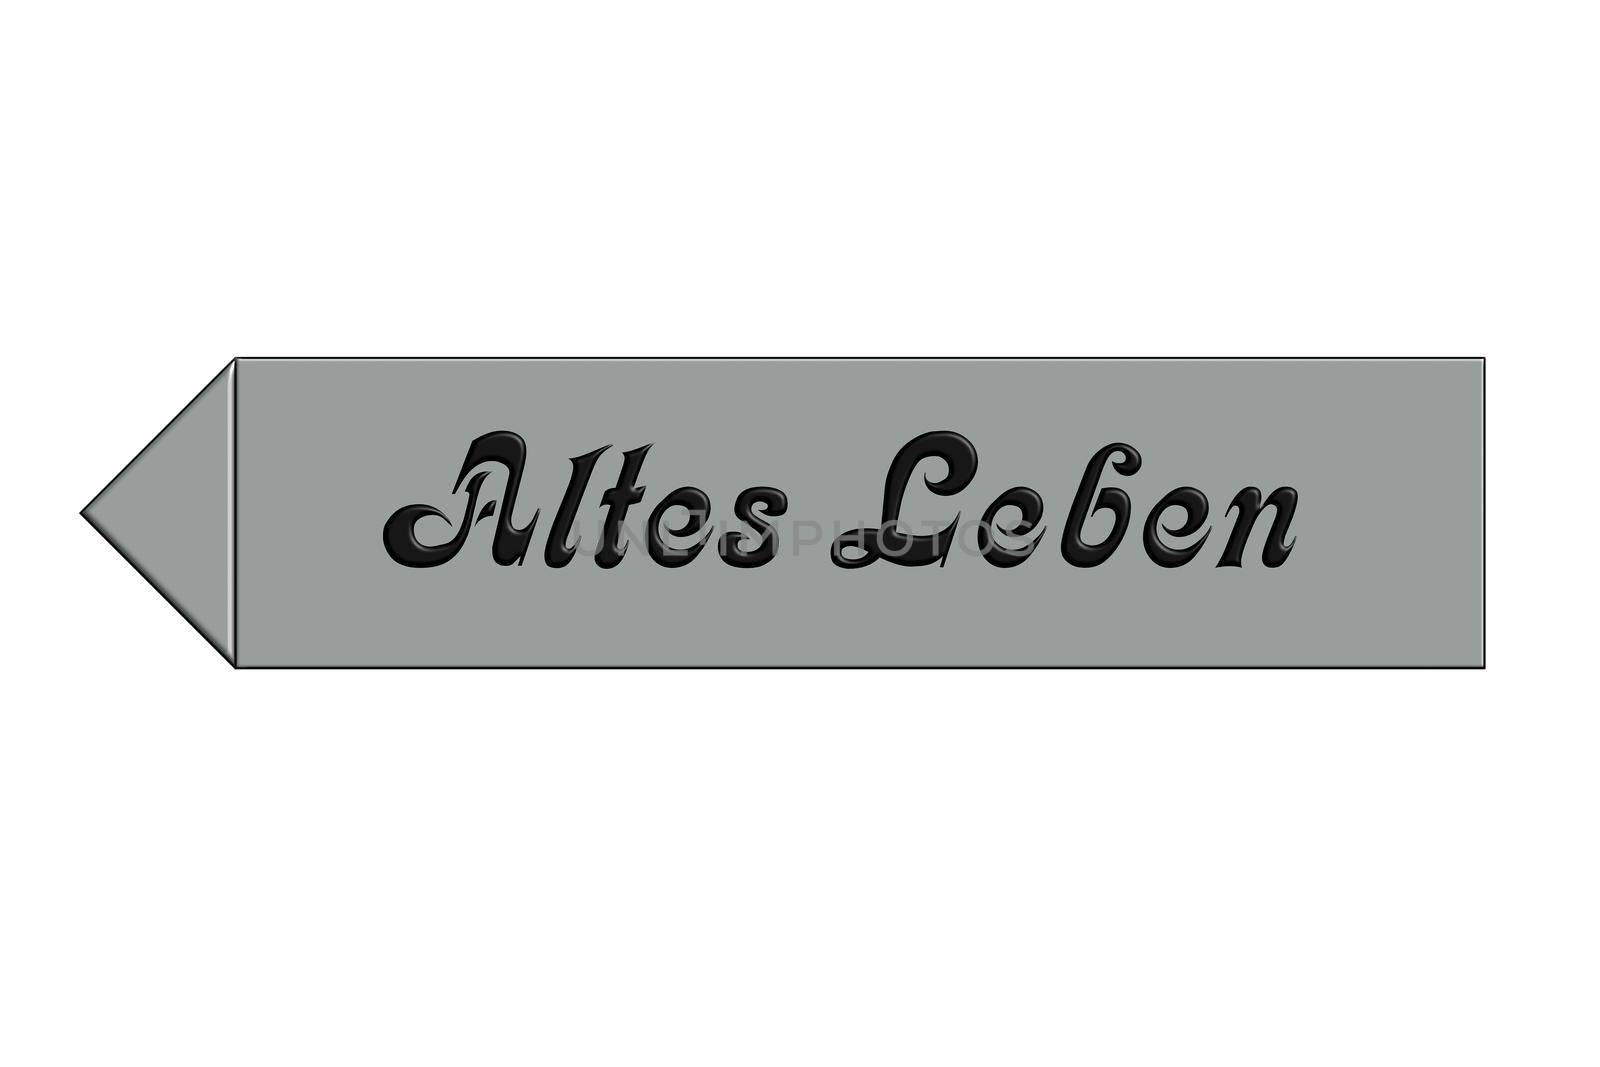 Street sign lettering in german language  - Old Life. Against white background